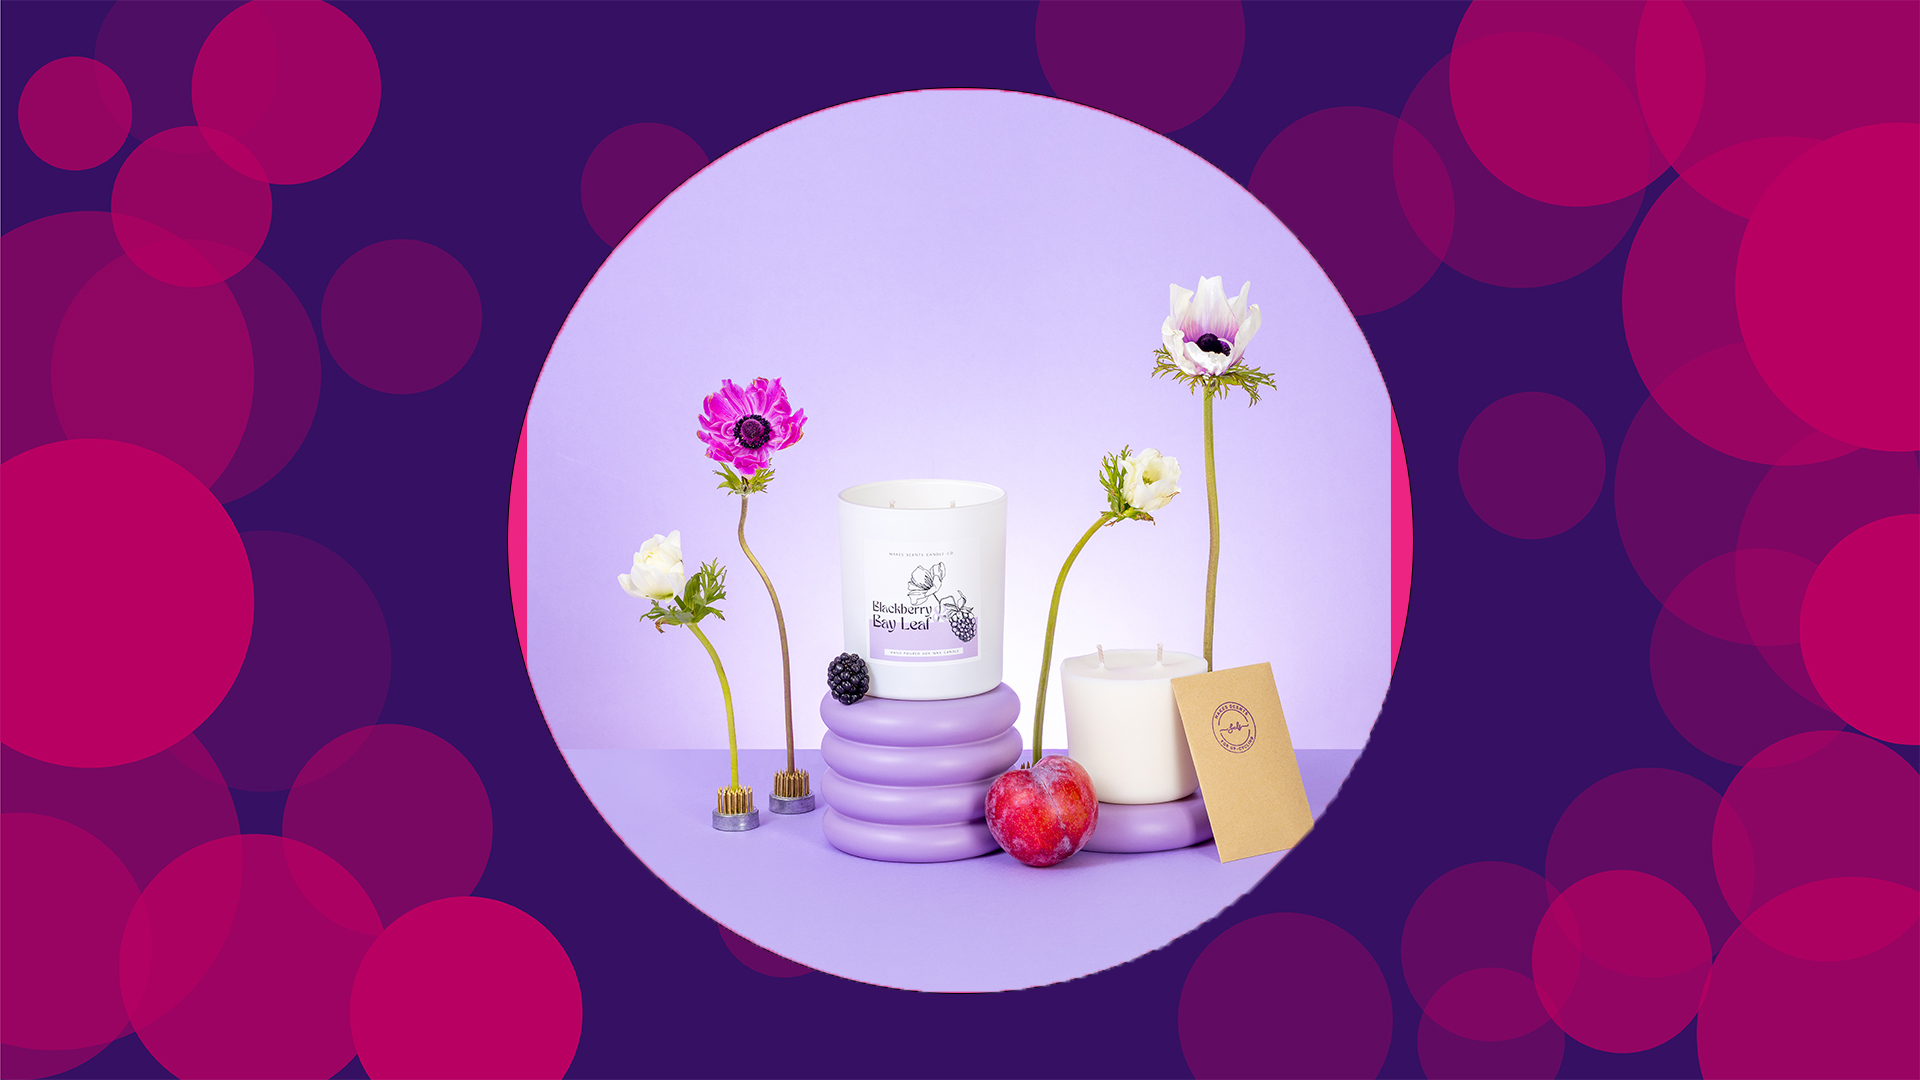 Purple background with pink circles with an image in the middle of a candle